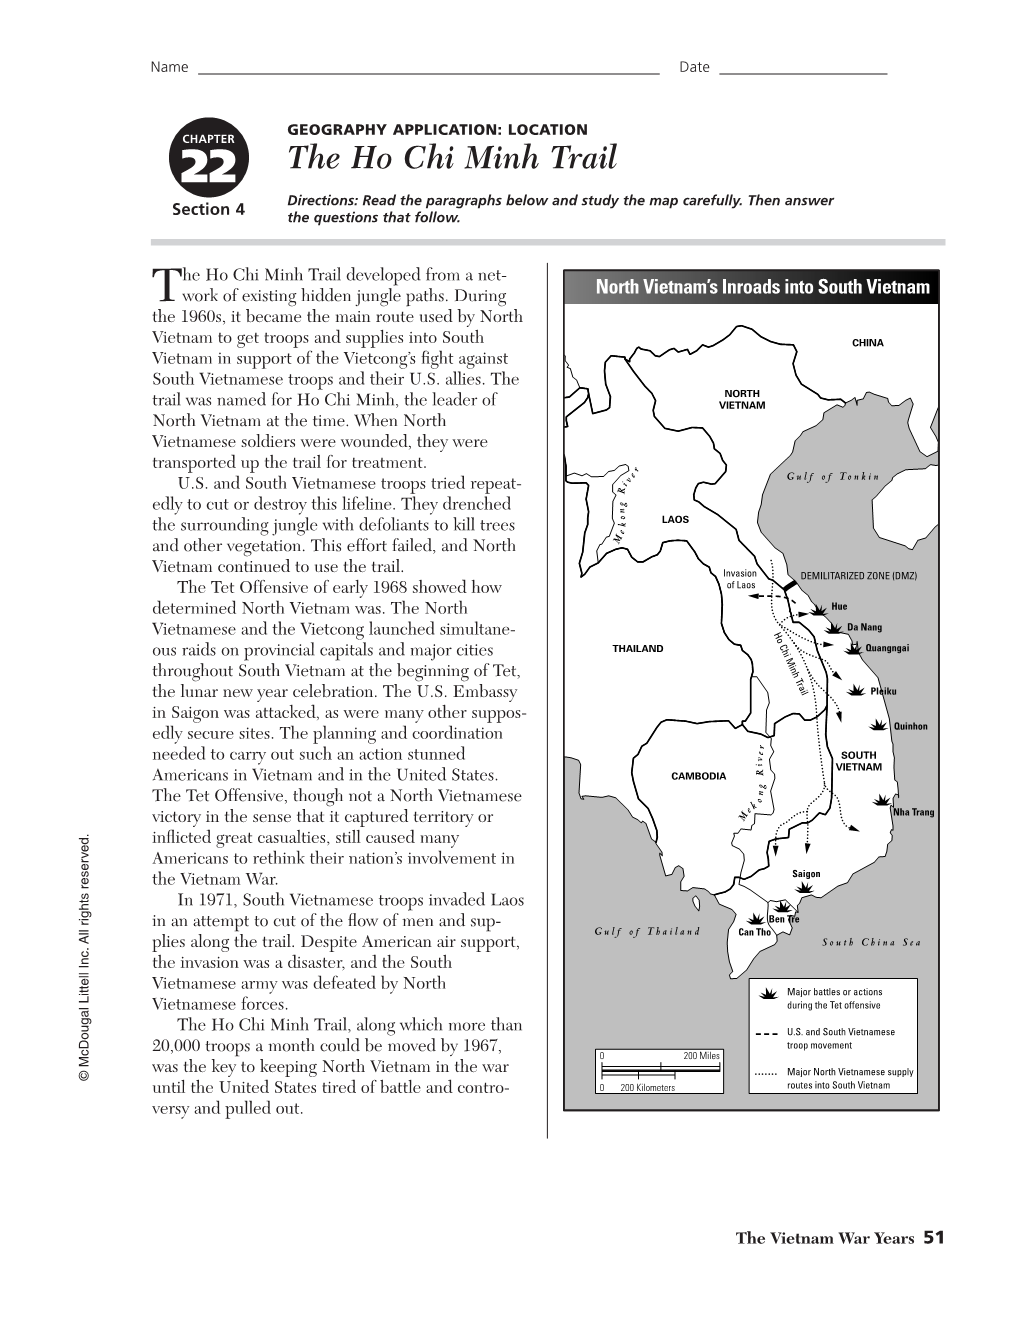 The Ho Chi Minh Trail Directions: Read the Paragraphs Below and Study the Map Carefully